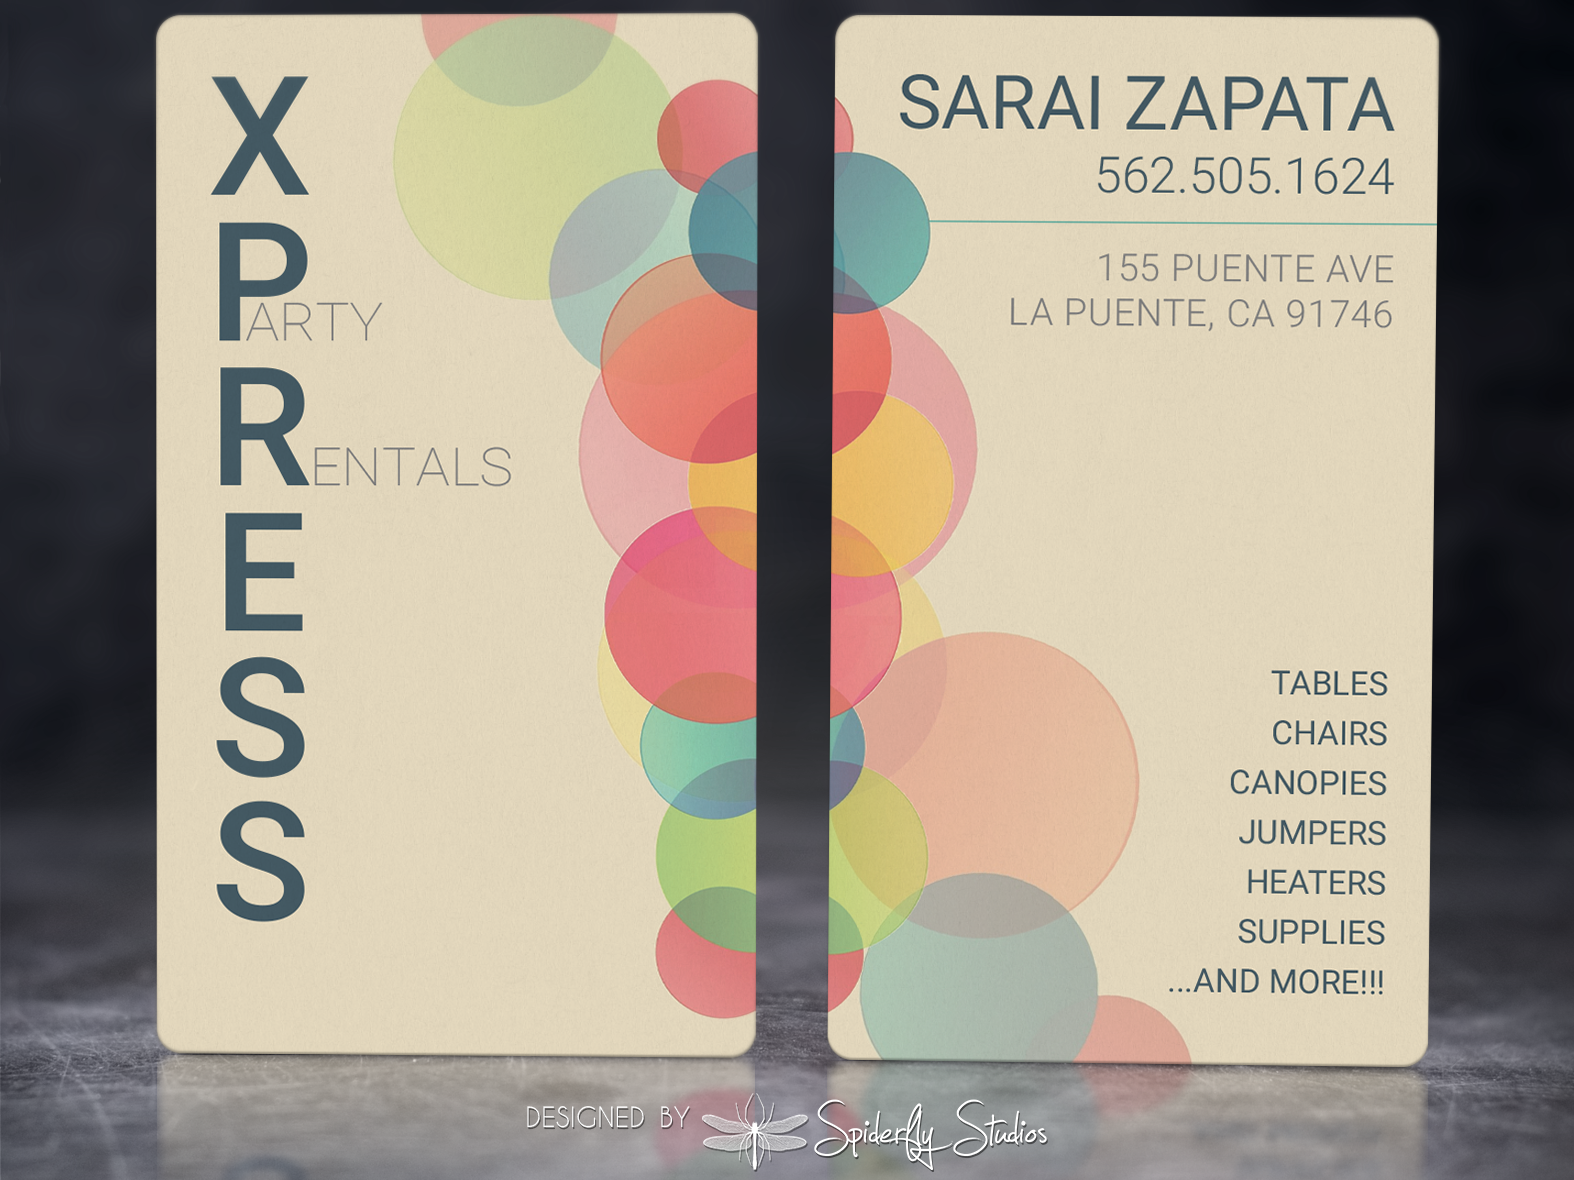 xpress-party-rentals-business-cards-by-spiderfly-studios-on-dribbble